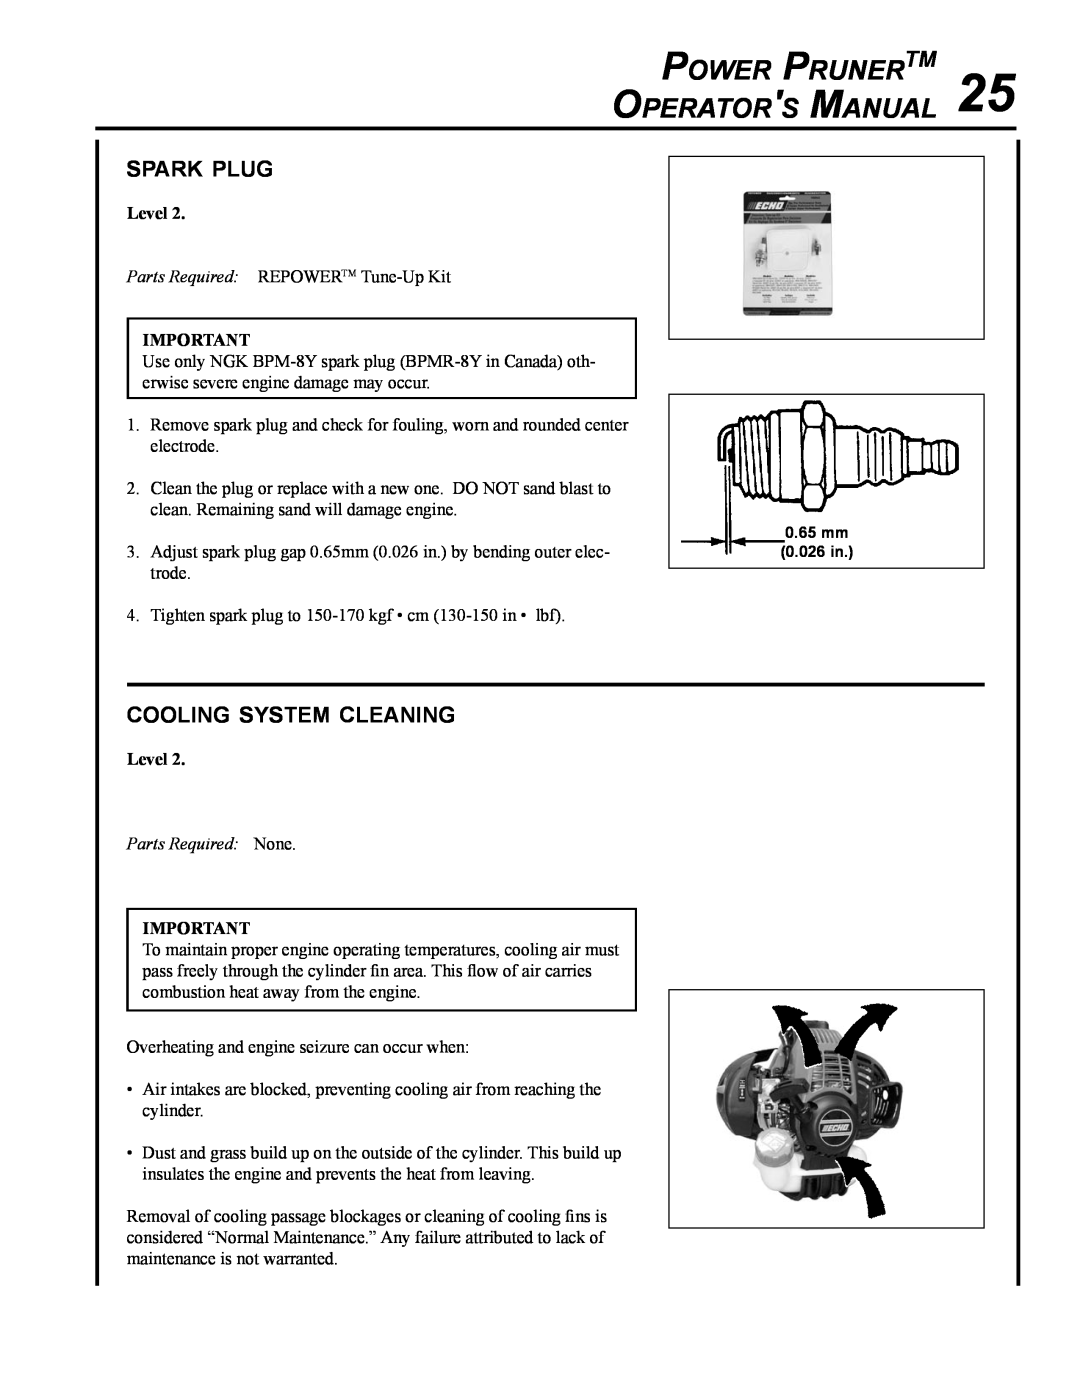 Echo PPT-265H manual Power PrunerTM 25 Operators Manual, spark plug, cooling system cleaning, Parts Required None 